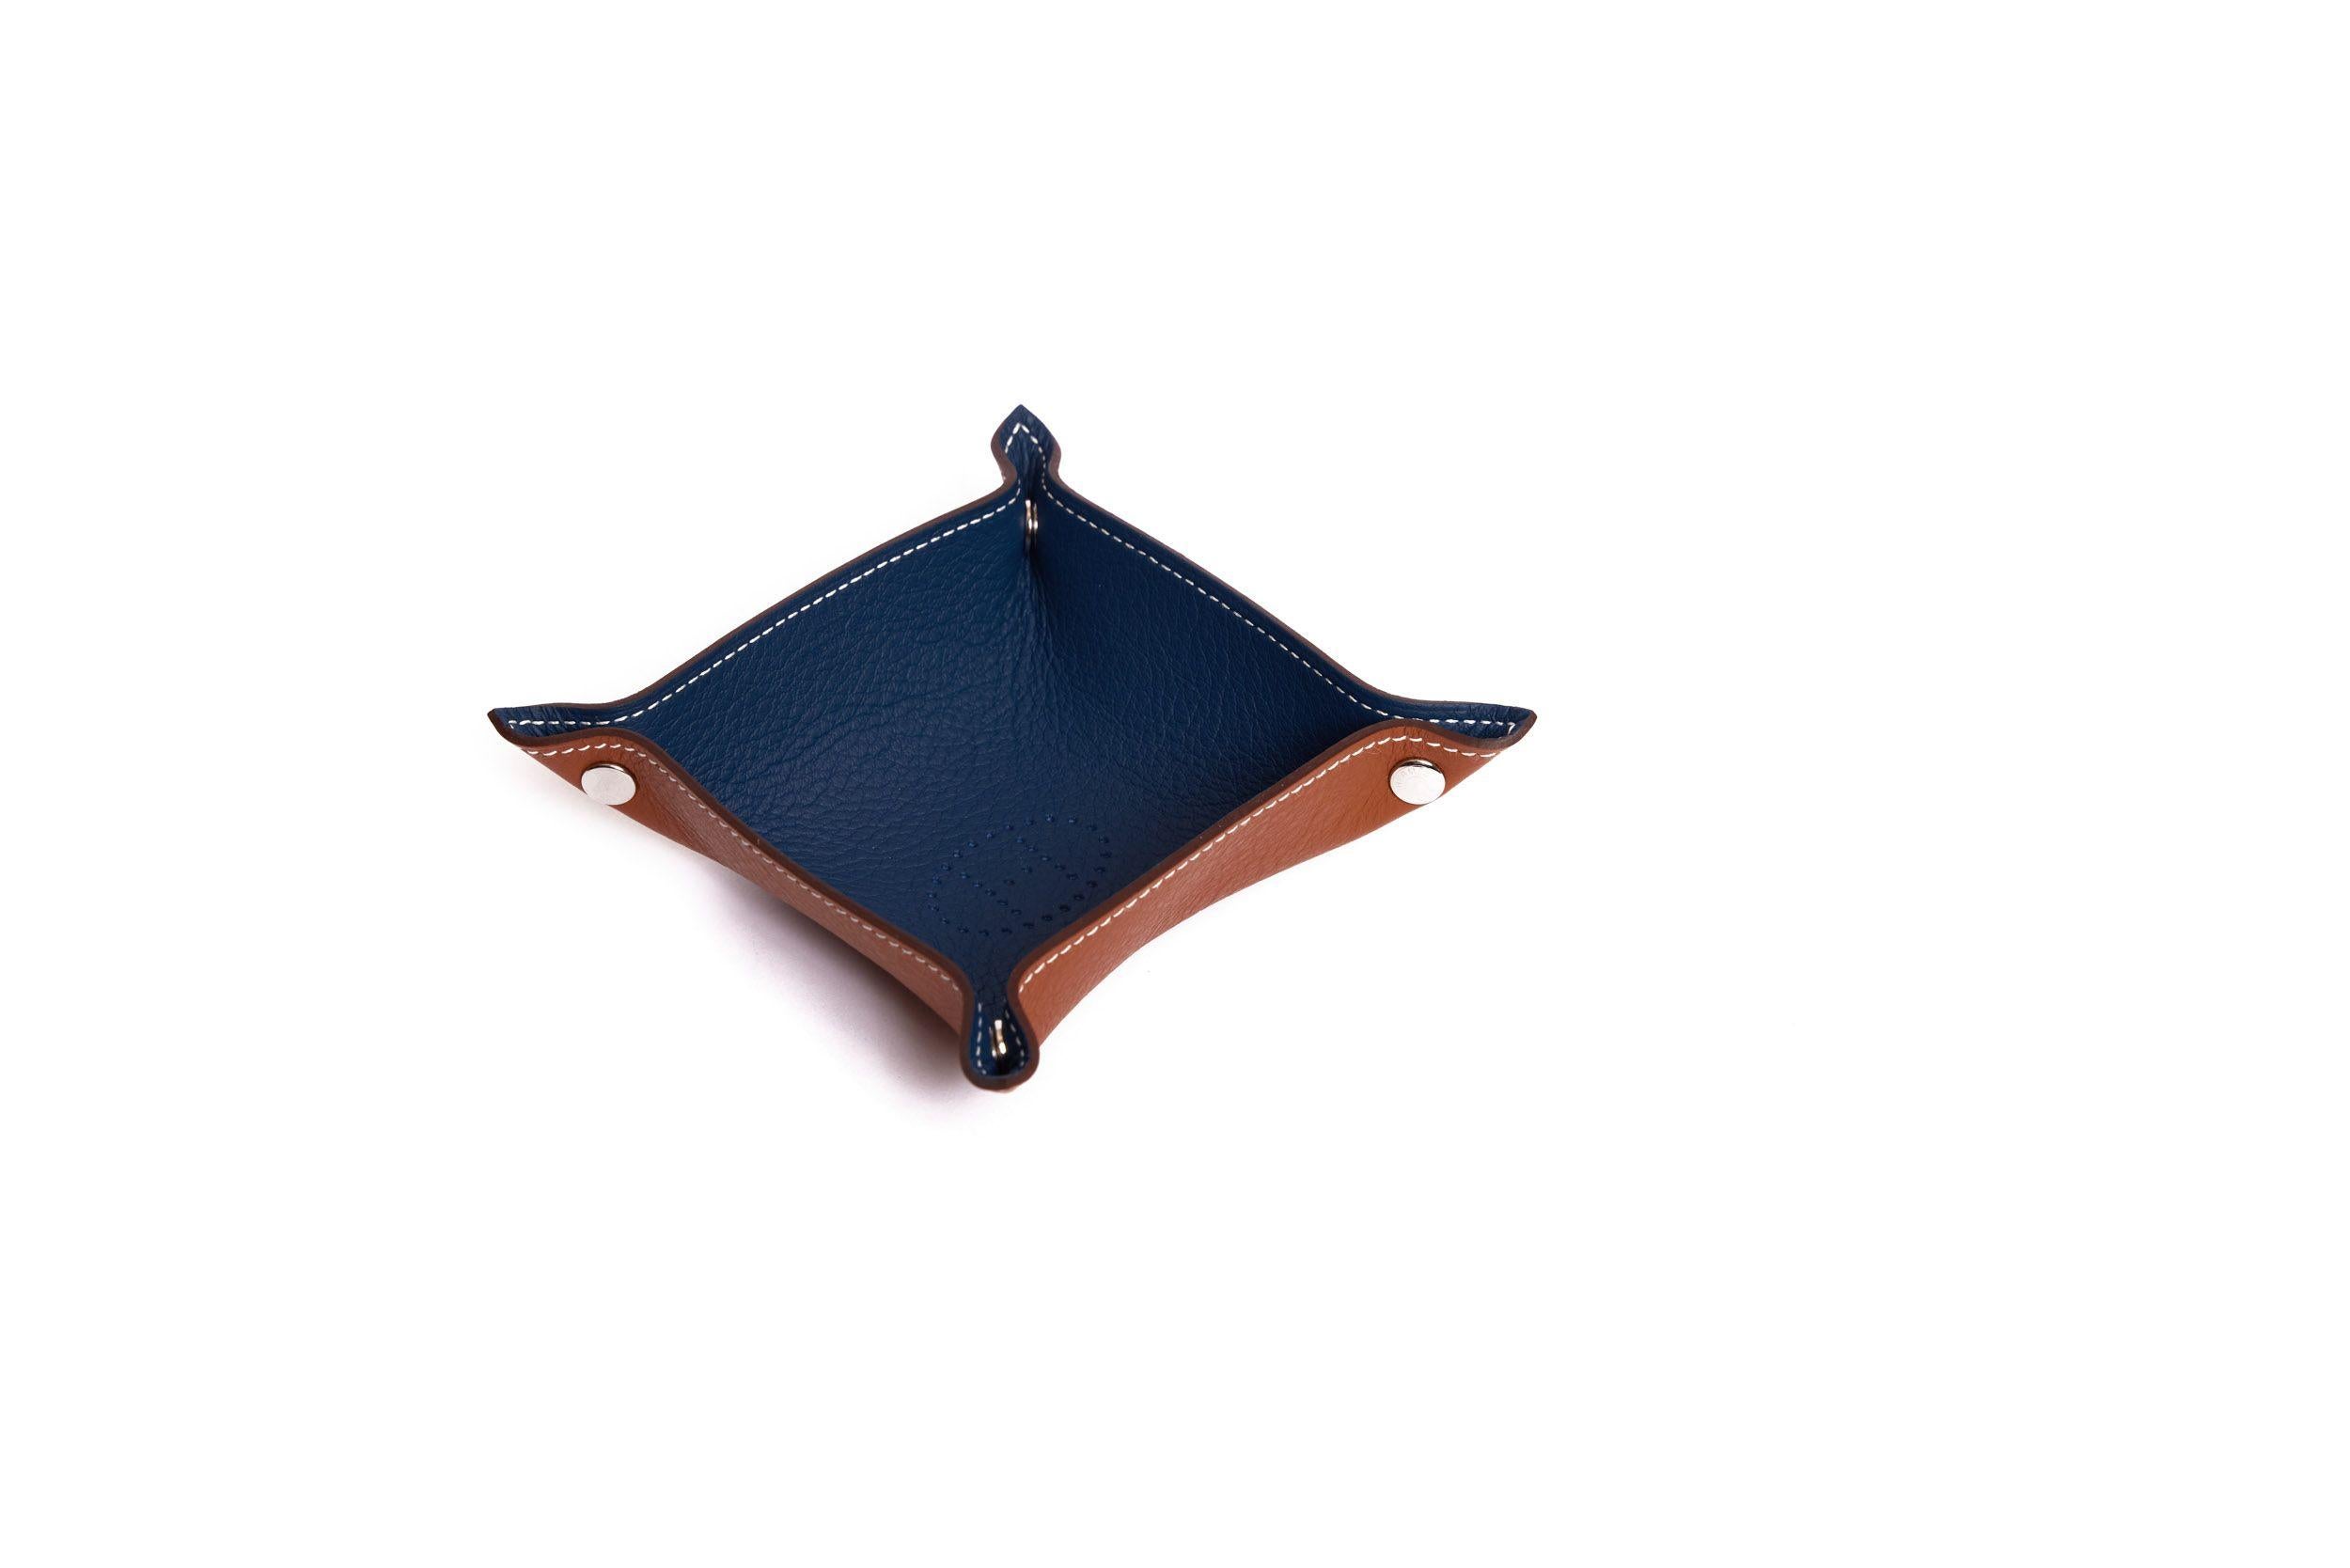 Hermès catch all desk tray in blue and brown leather. The 